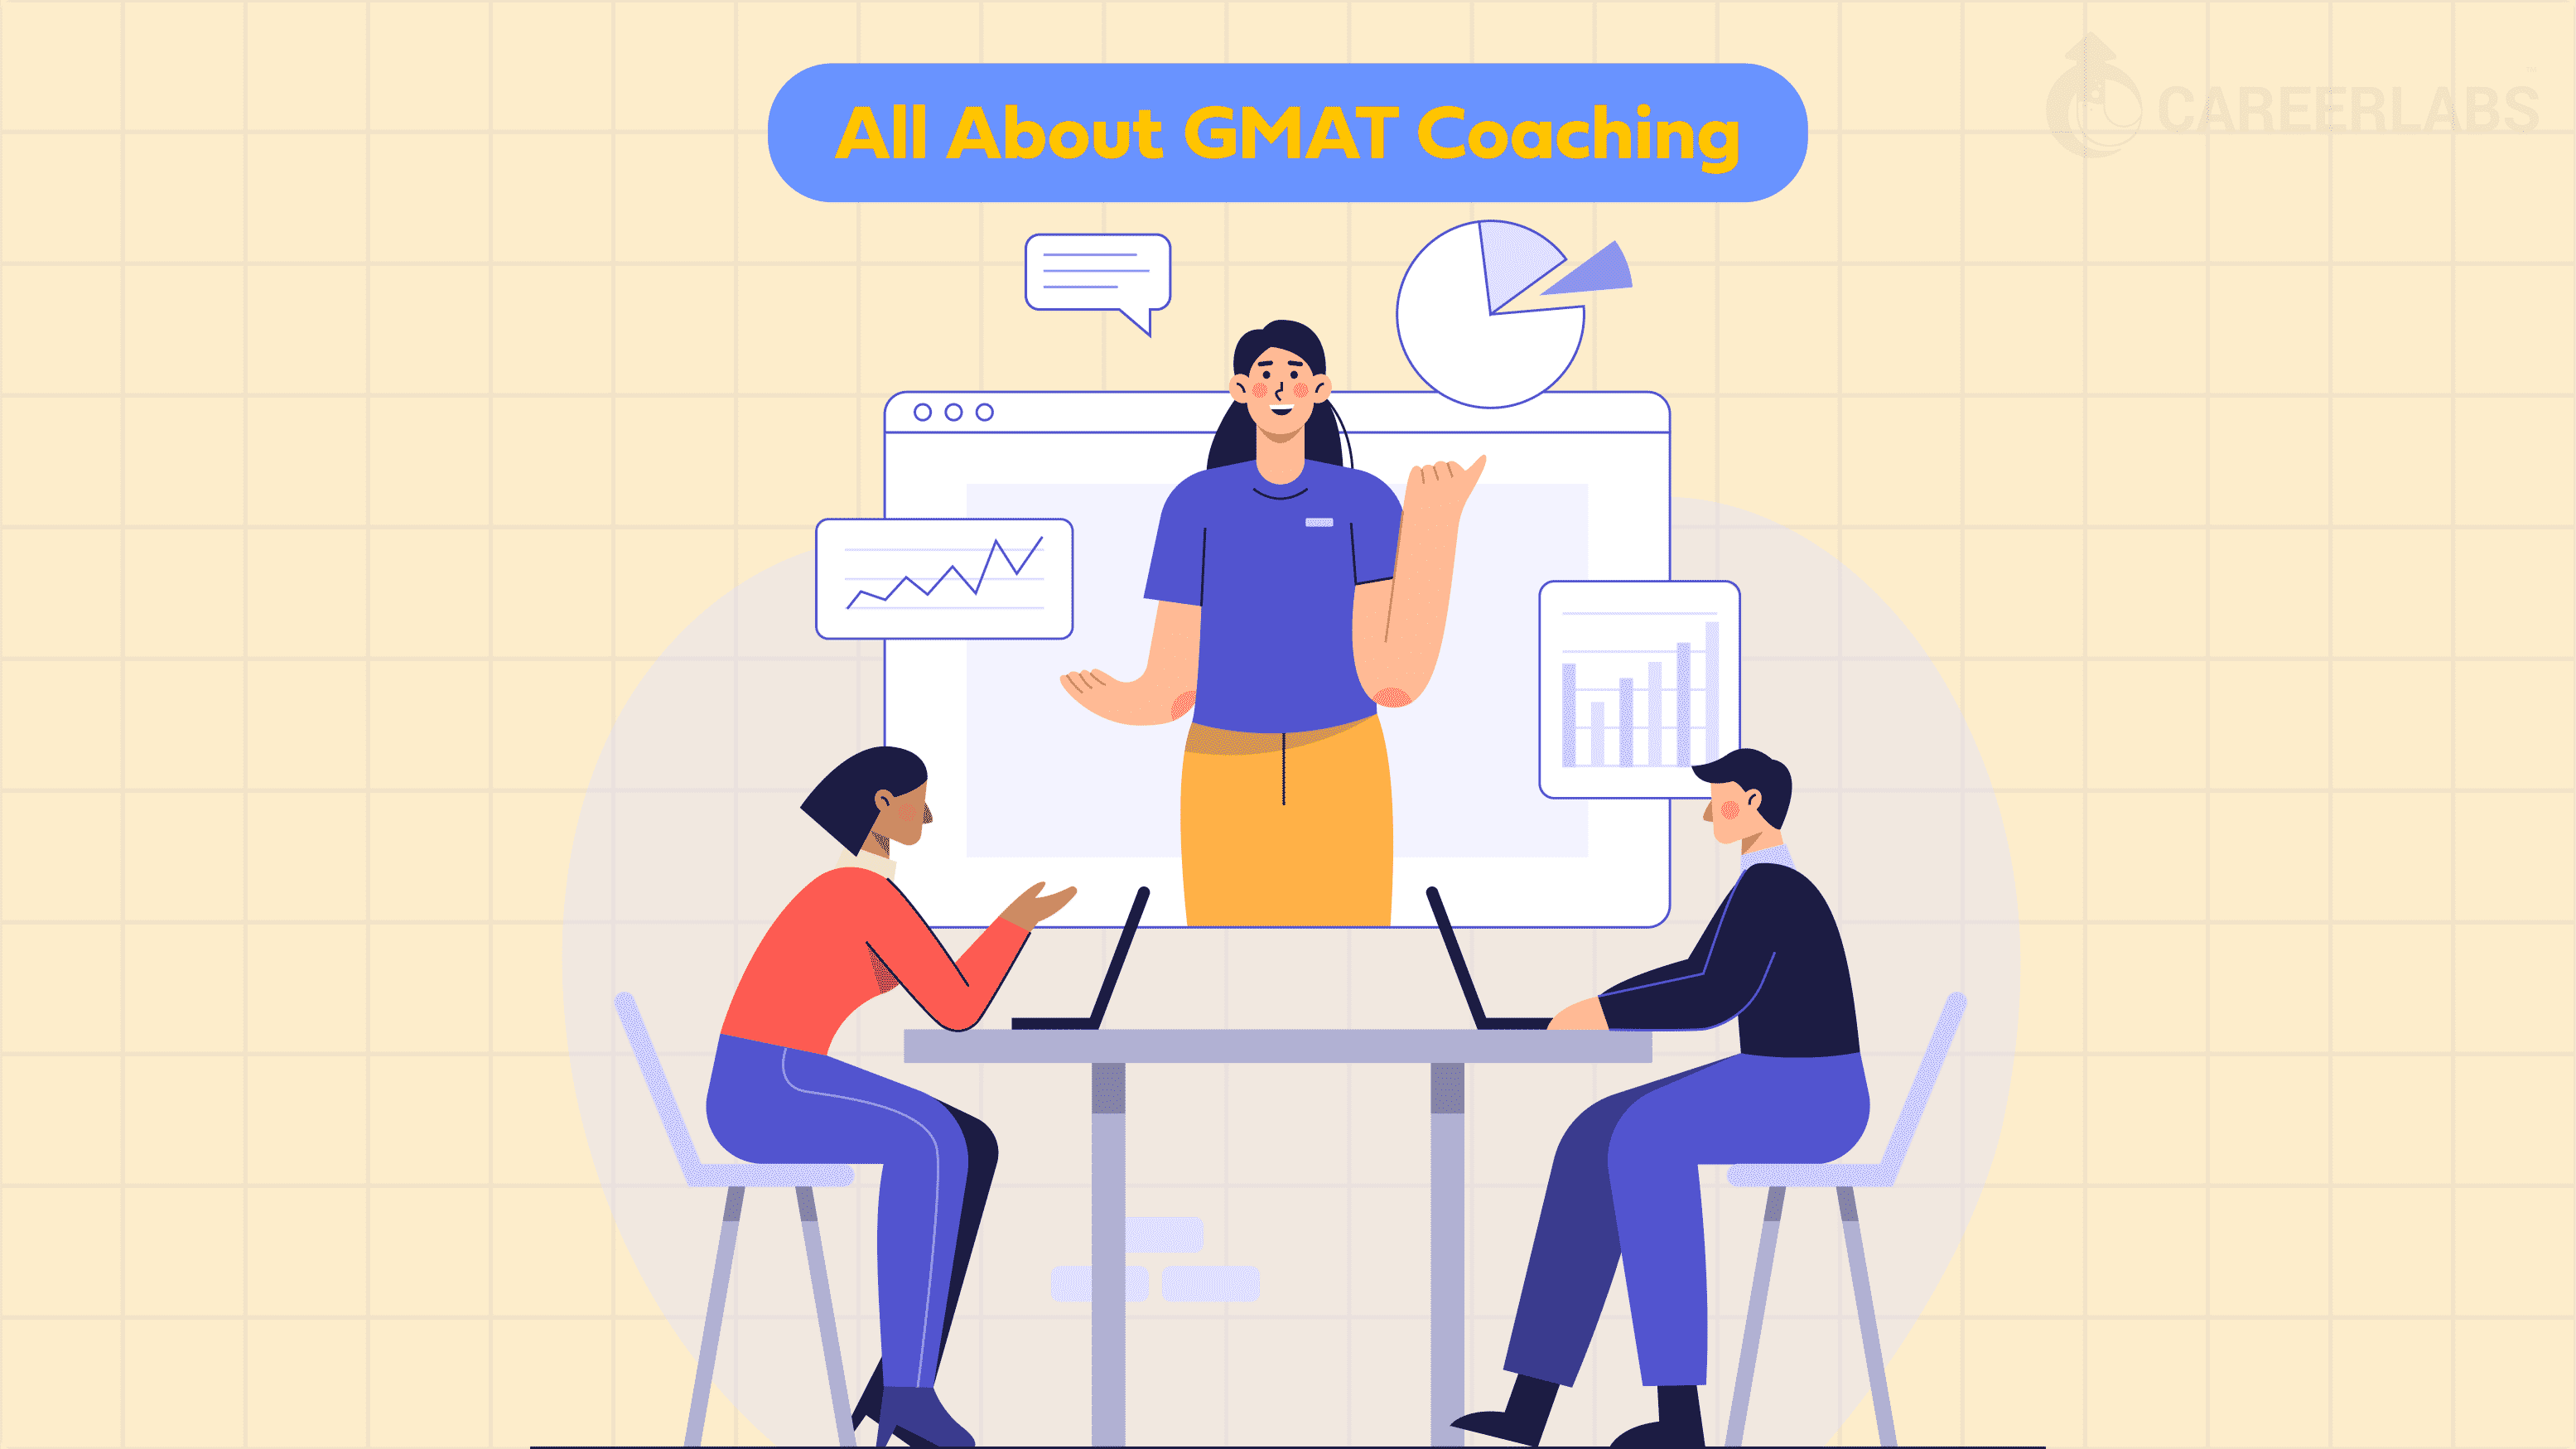 All About GMAT Coaching